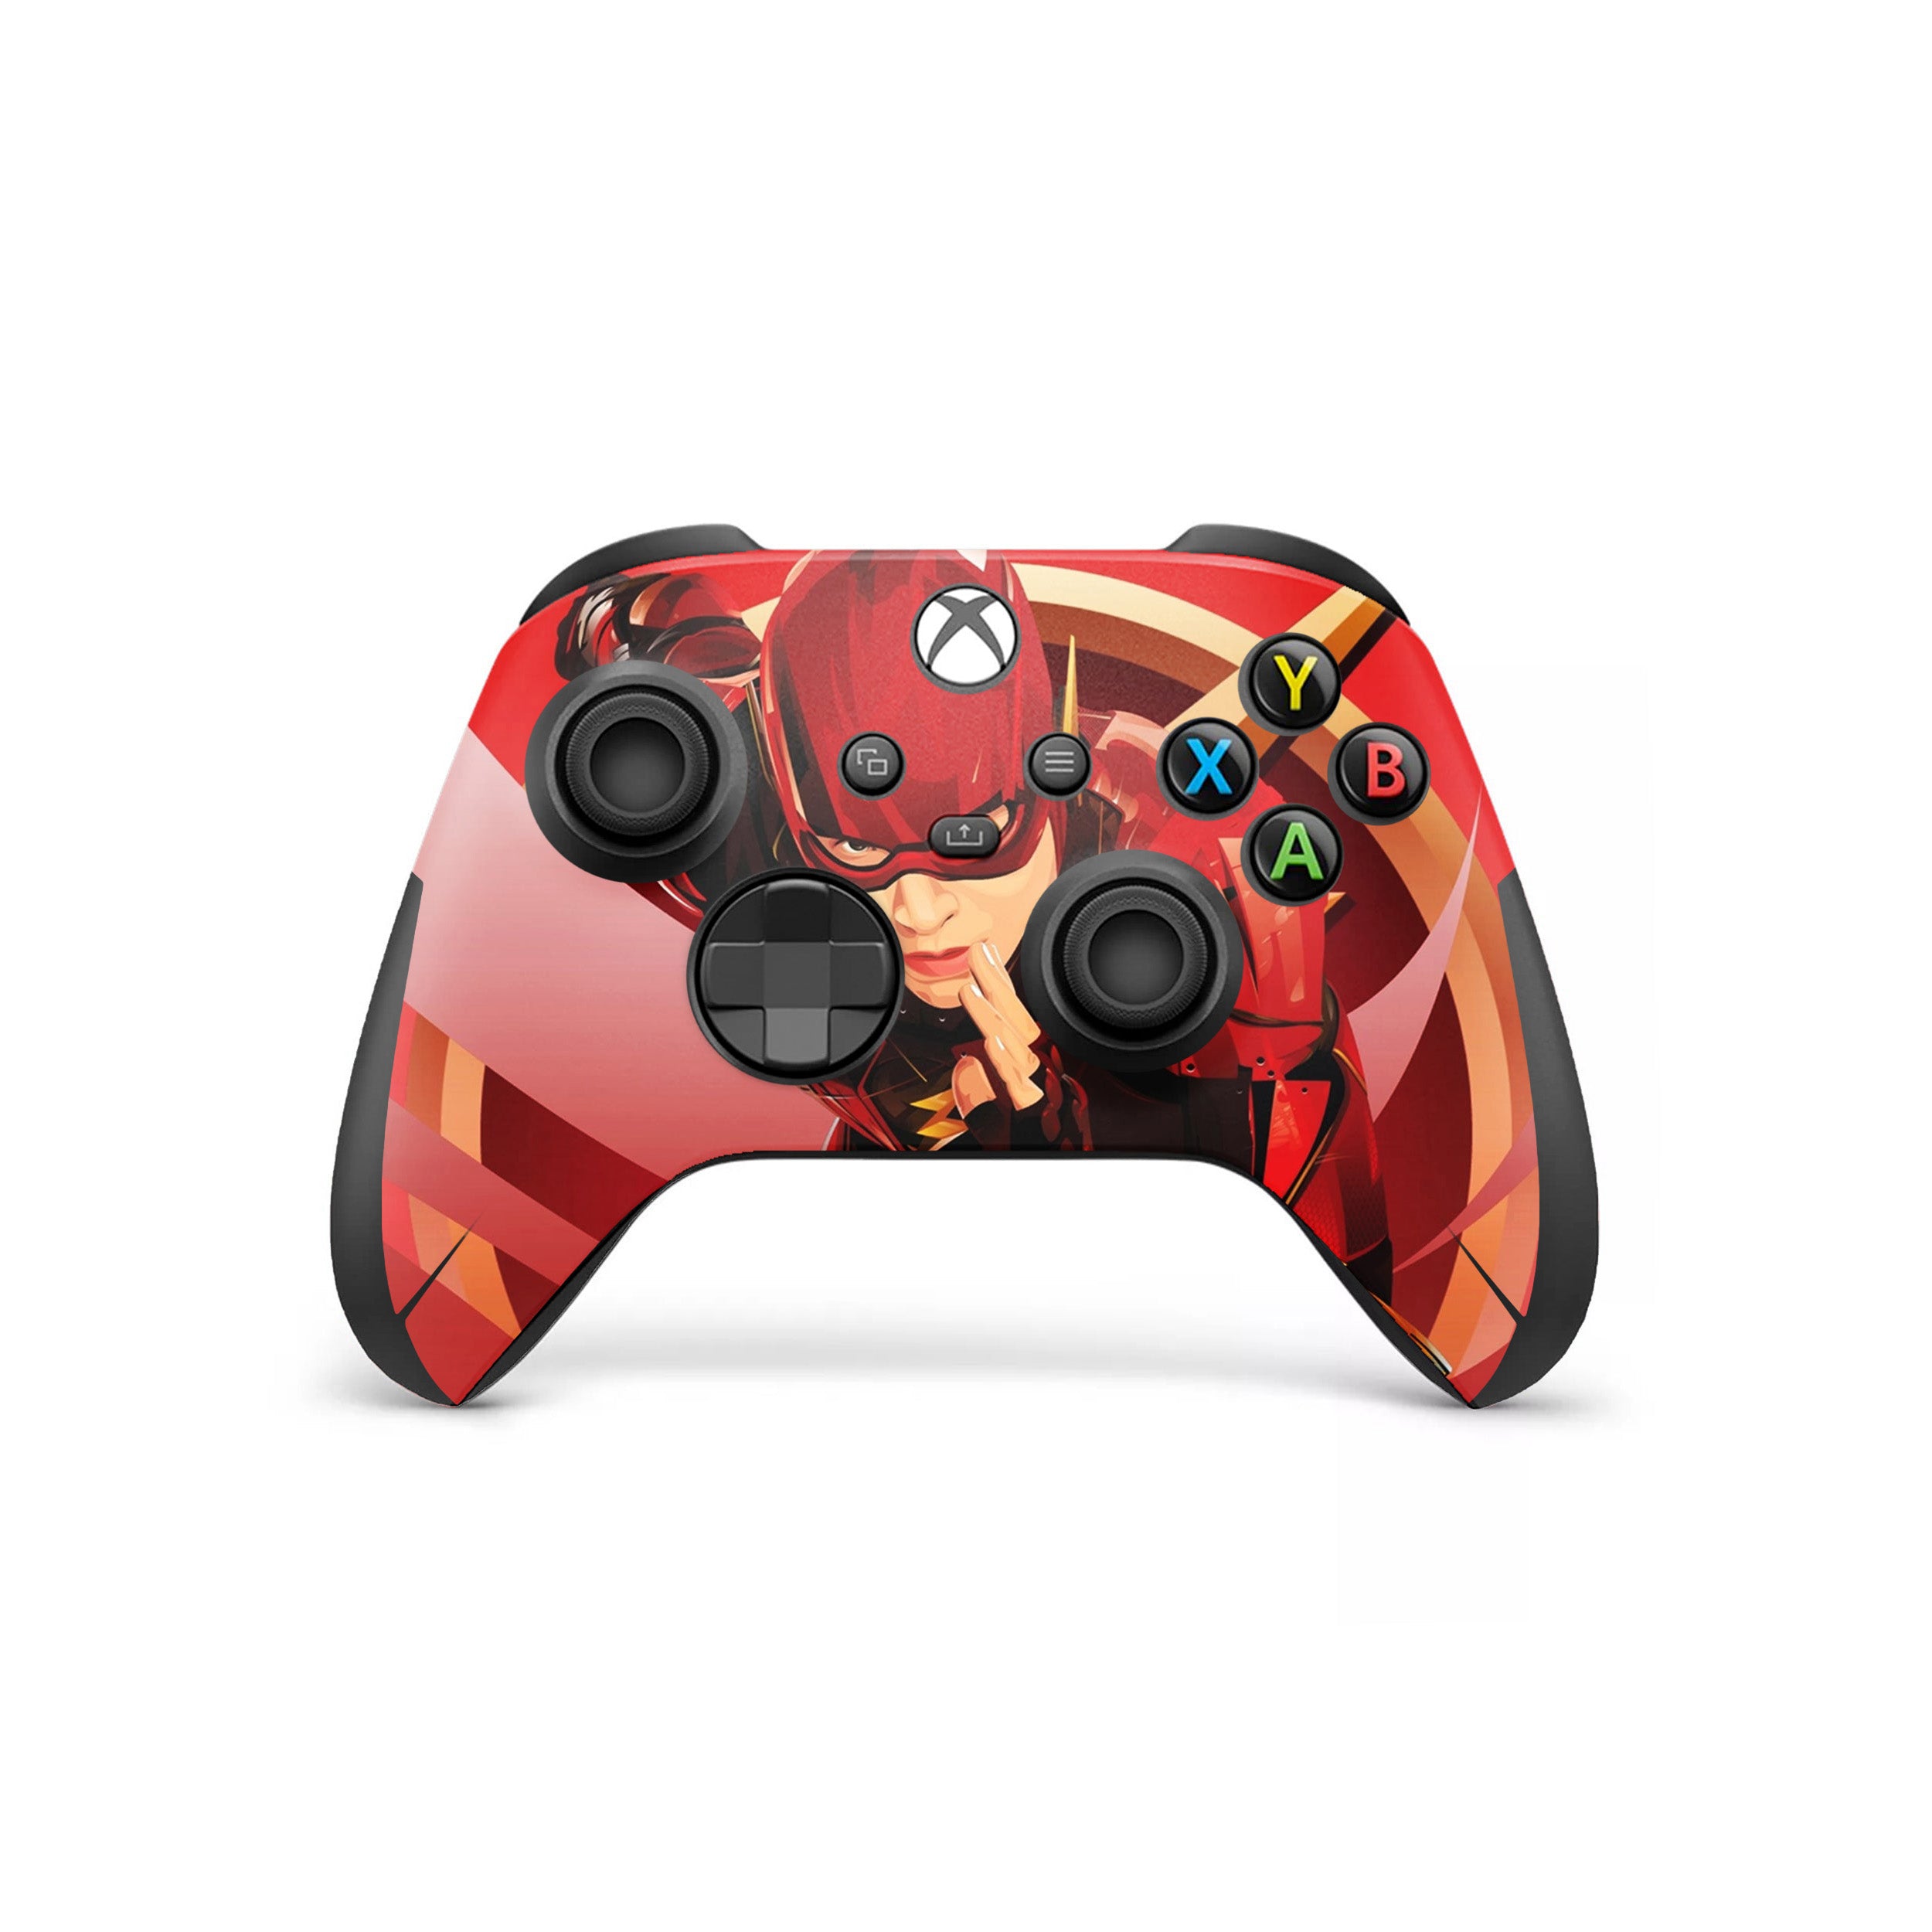 A video game skin featuring a DC Comics Flash design for the Xbox Wireless Controller.